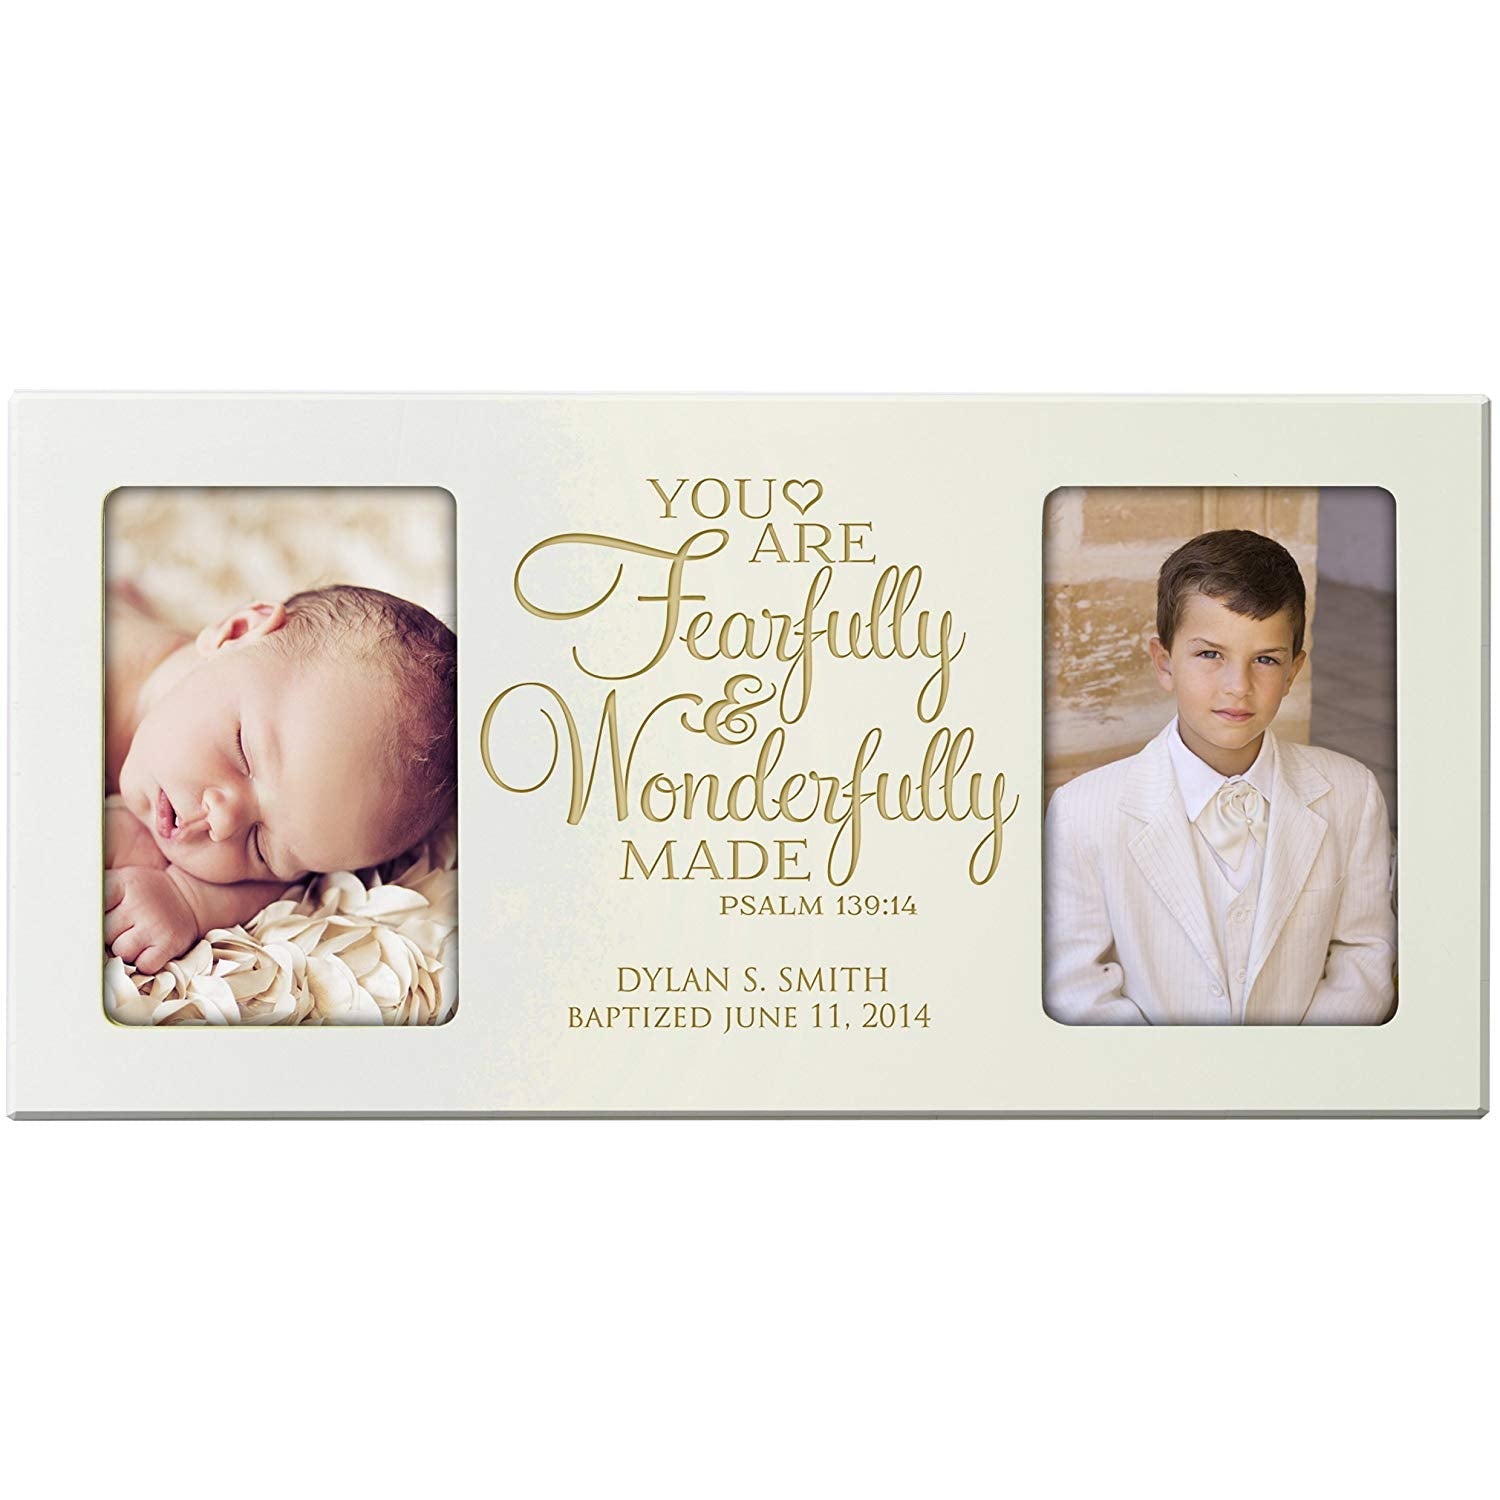 Personalized First Communion Photo Frame "Fearfully & Wonderfully" - LifeSong Milestones